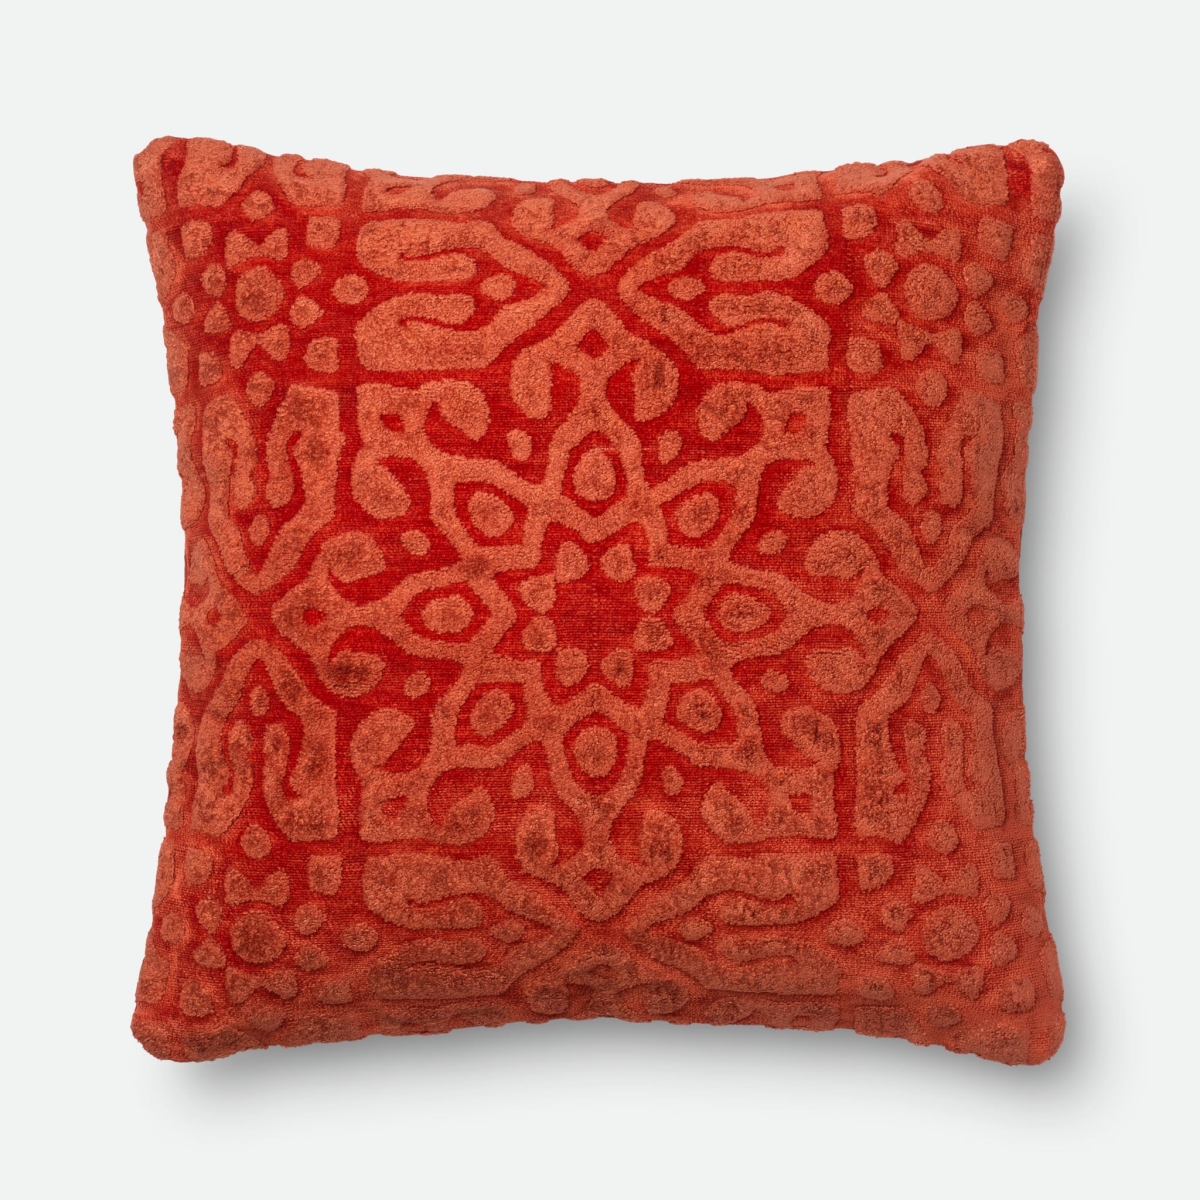 Dsetgpi09cd00pil3 22 X 22 In. Contemporary Down Insert Decorative Pillow, Chili